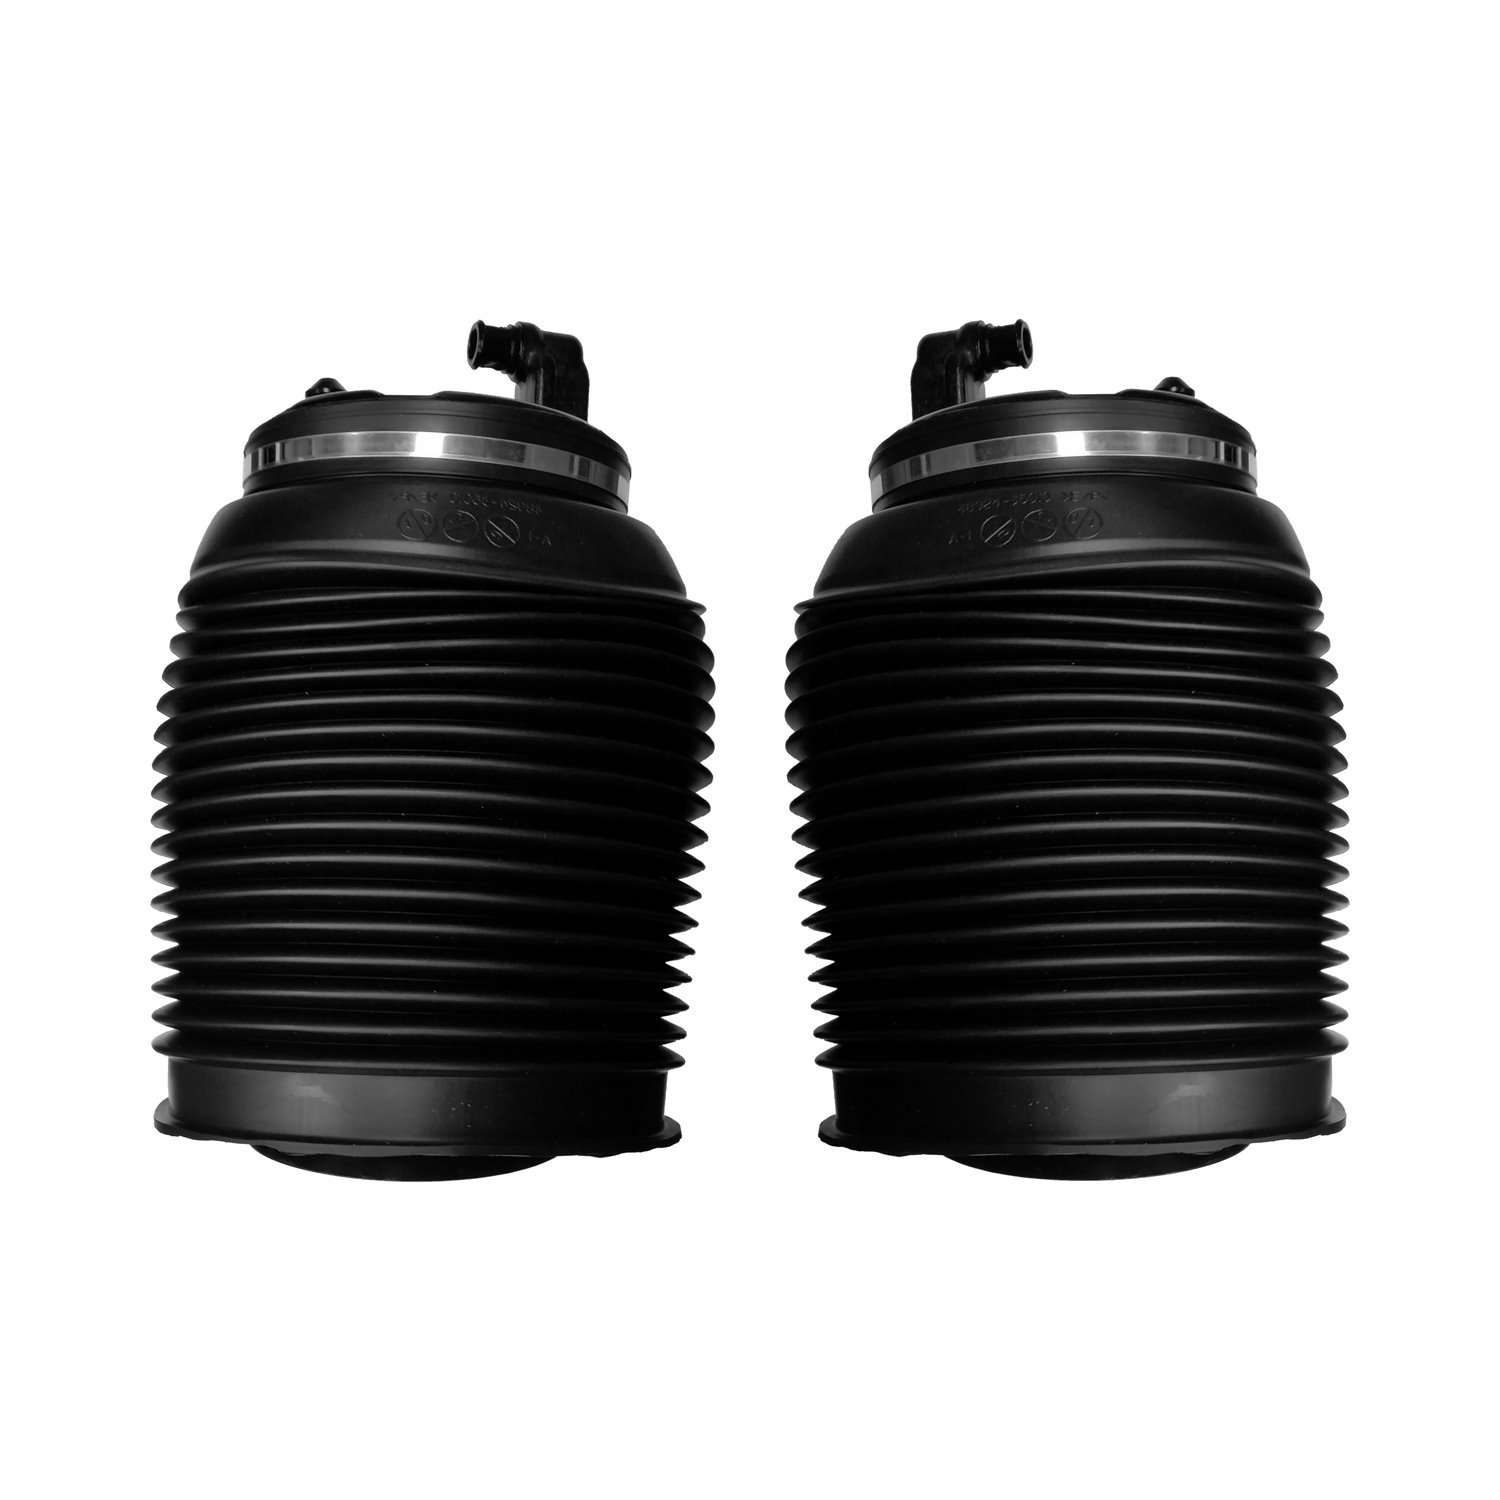 2-15-516500 Rear Suspension Air Spring Set, For Models w/Factory Air Suspension Fits Select Toyota Sequoia